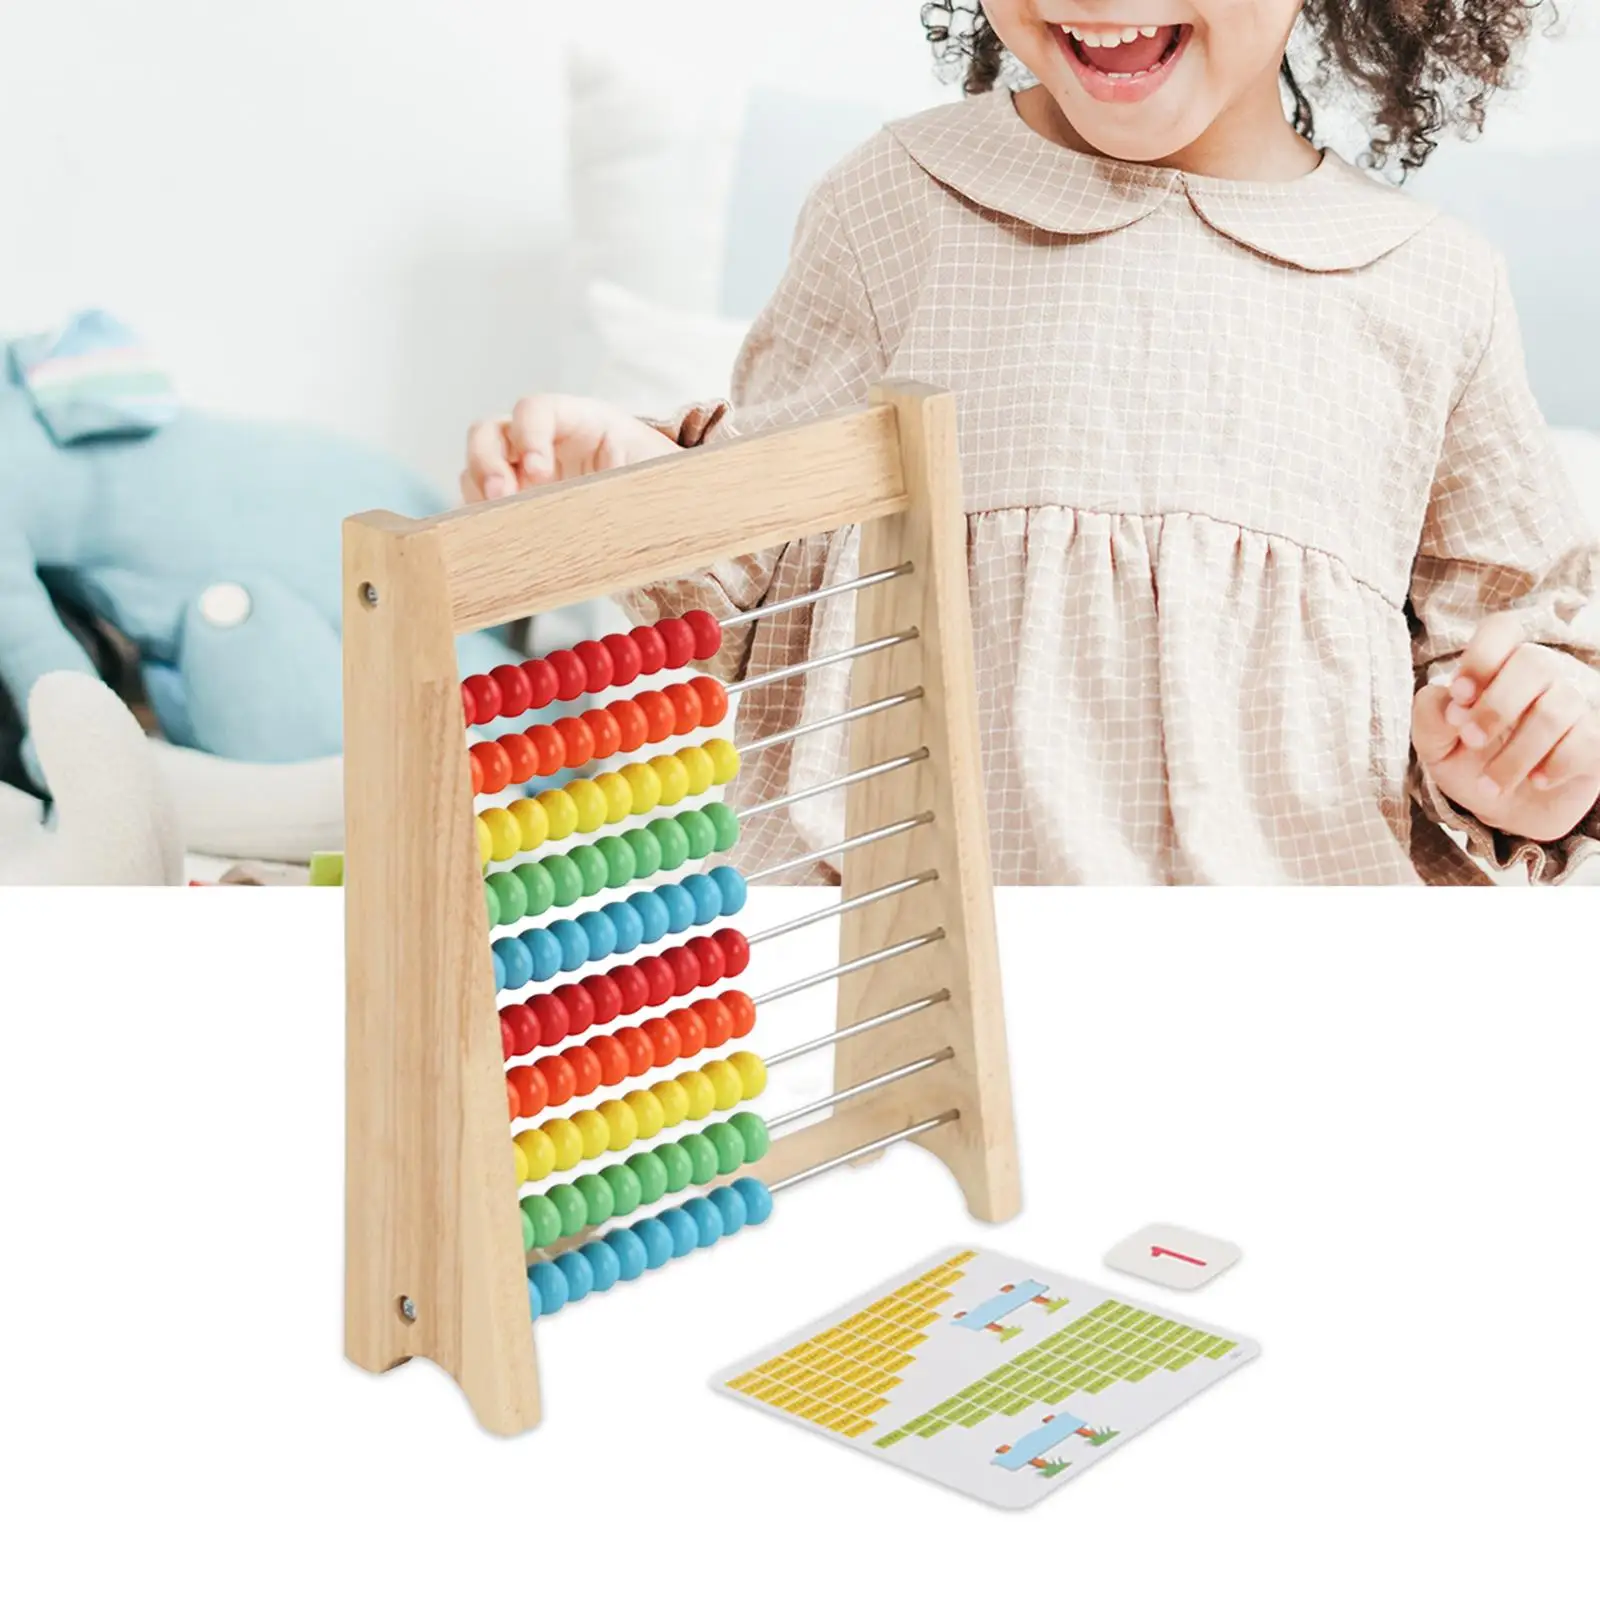 Educational Counting Toy with 100 Beads Math Manipulatives Wooden Abacus Toy for Kids Children Elementary Kindergarten Preschool